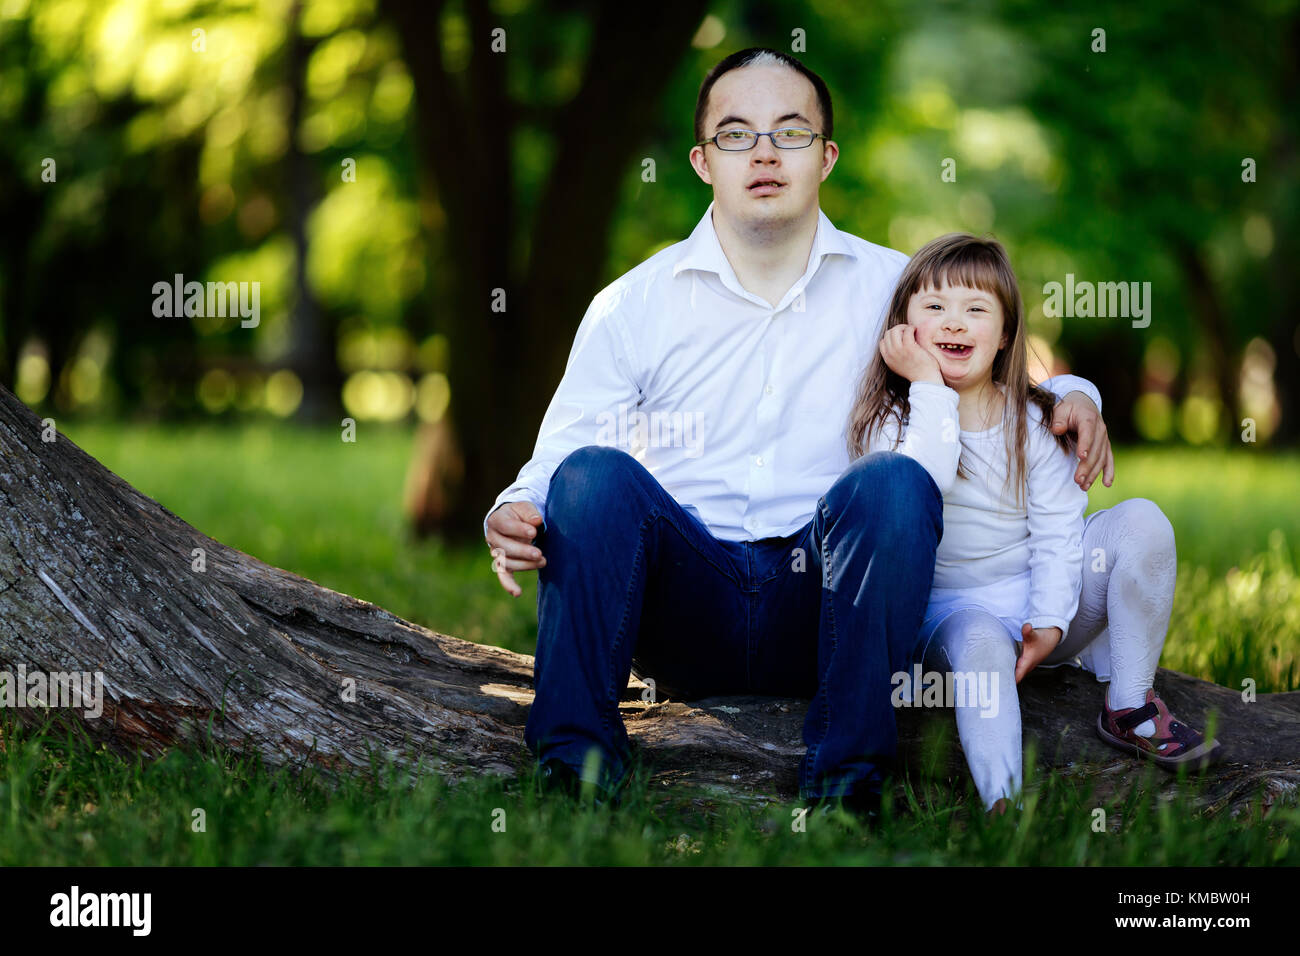 People with down syndrome cute bonding Stock Photo